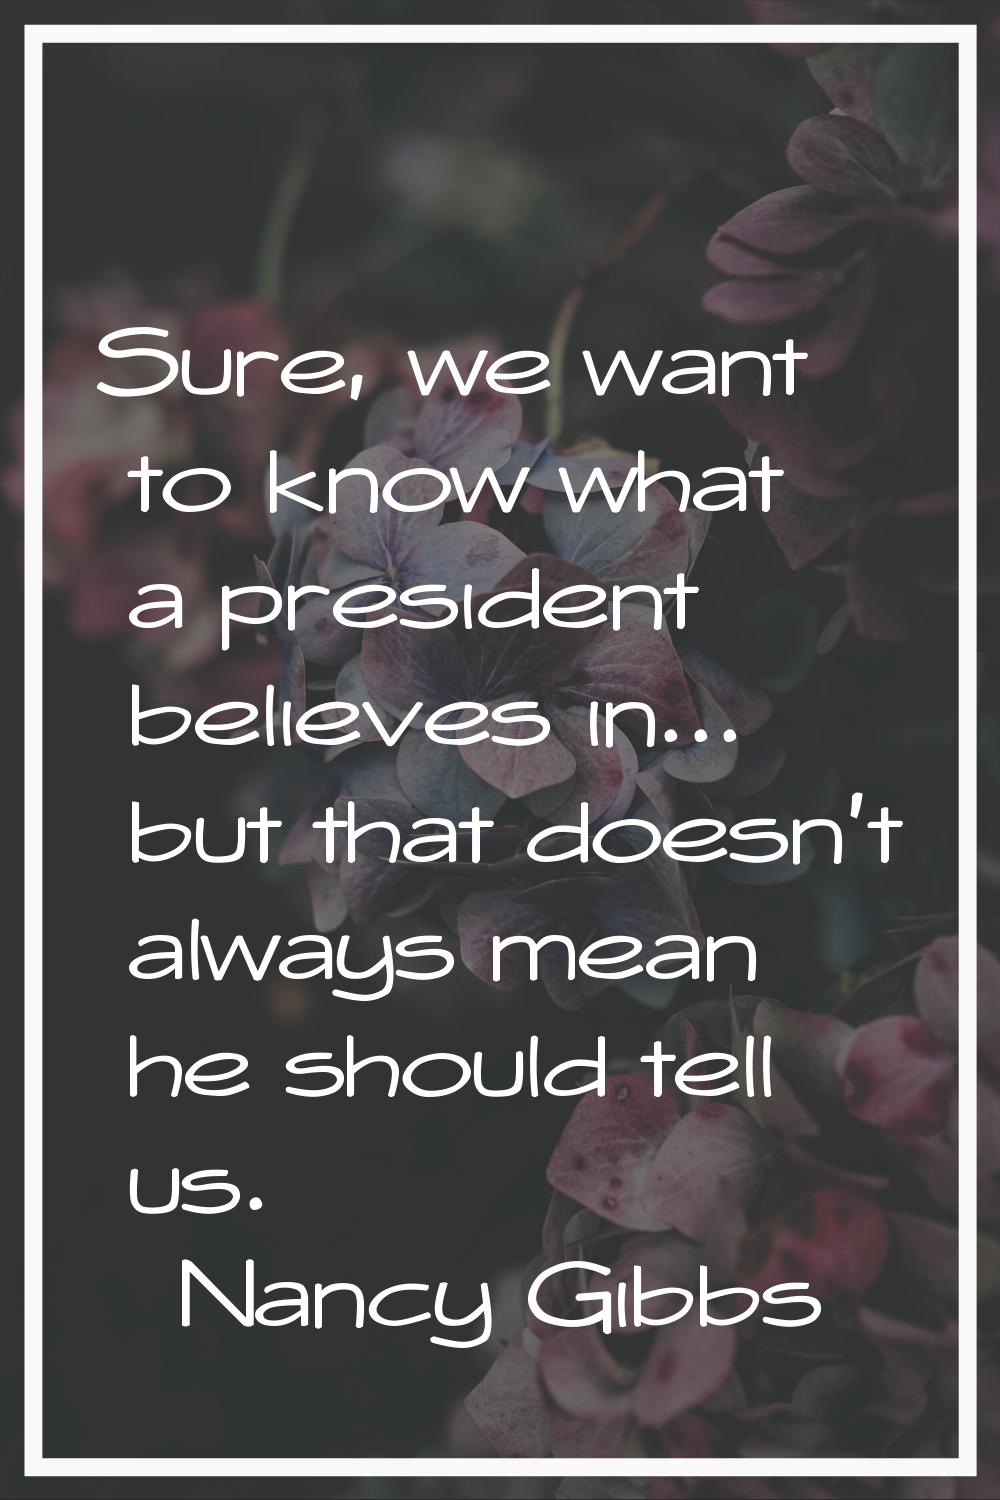 Sure, we want to know what a president believes in... but that doesn't always mean he should tell u